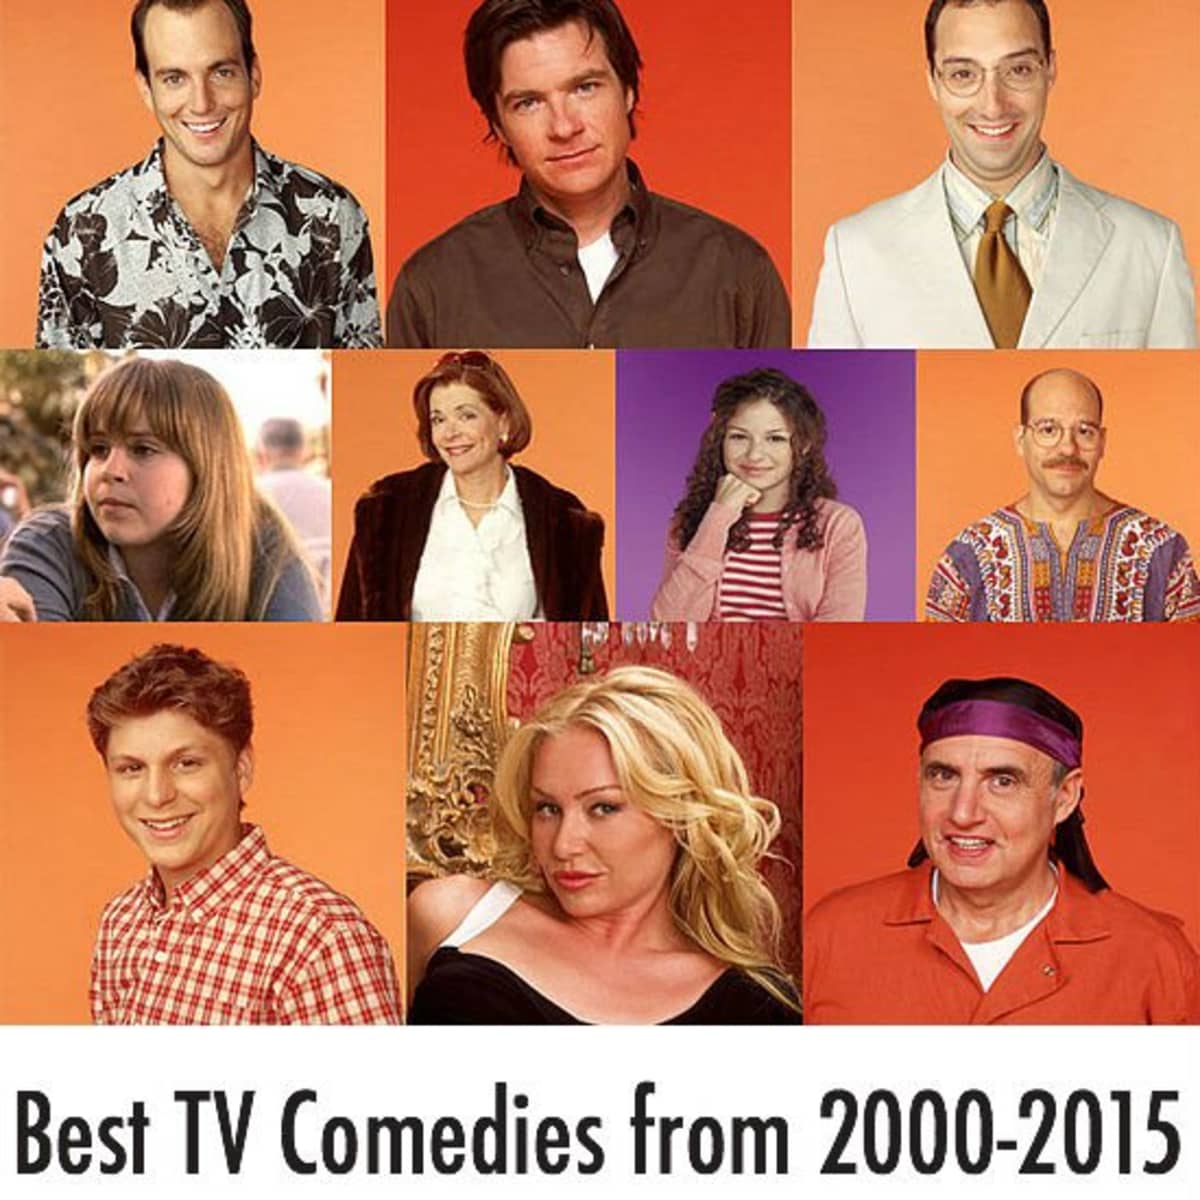 Top 10 Best Comedy TV Shows 2000 to 2015 - HubPages